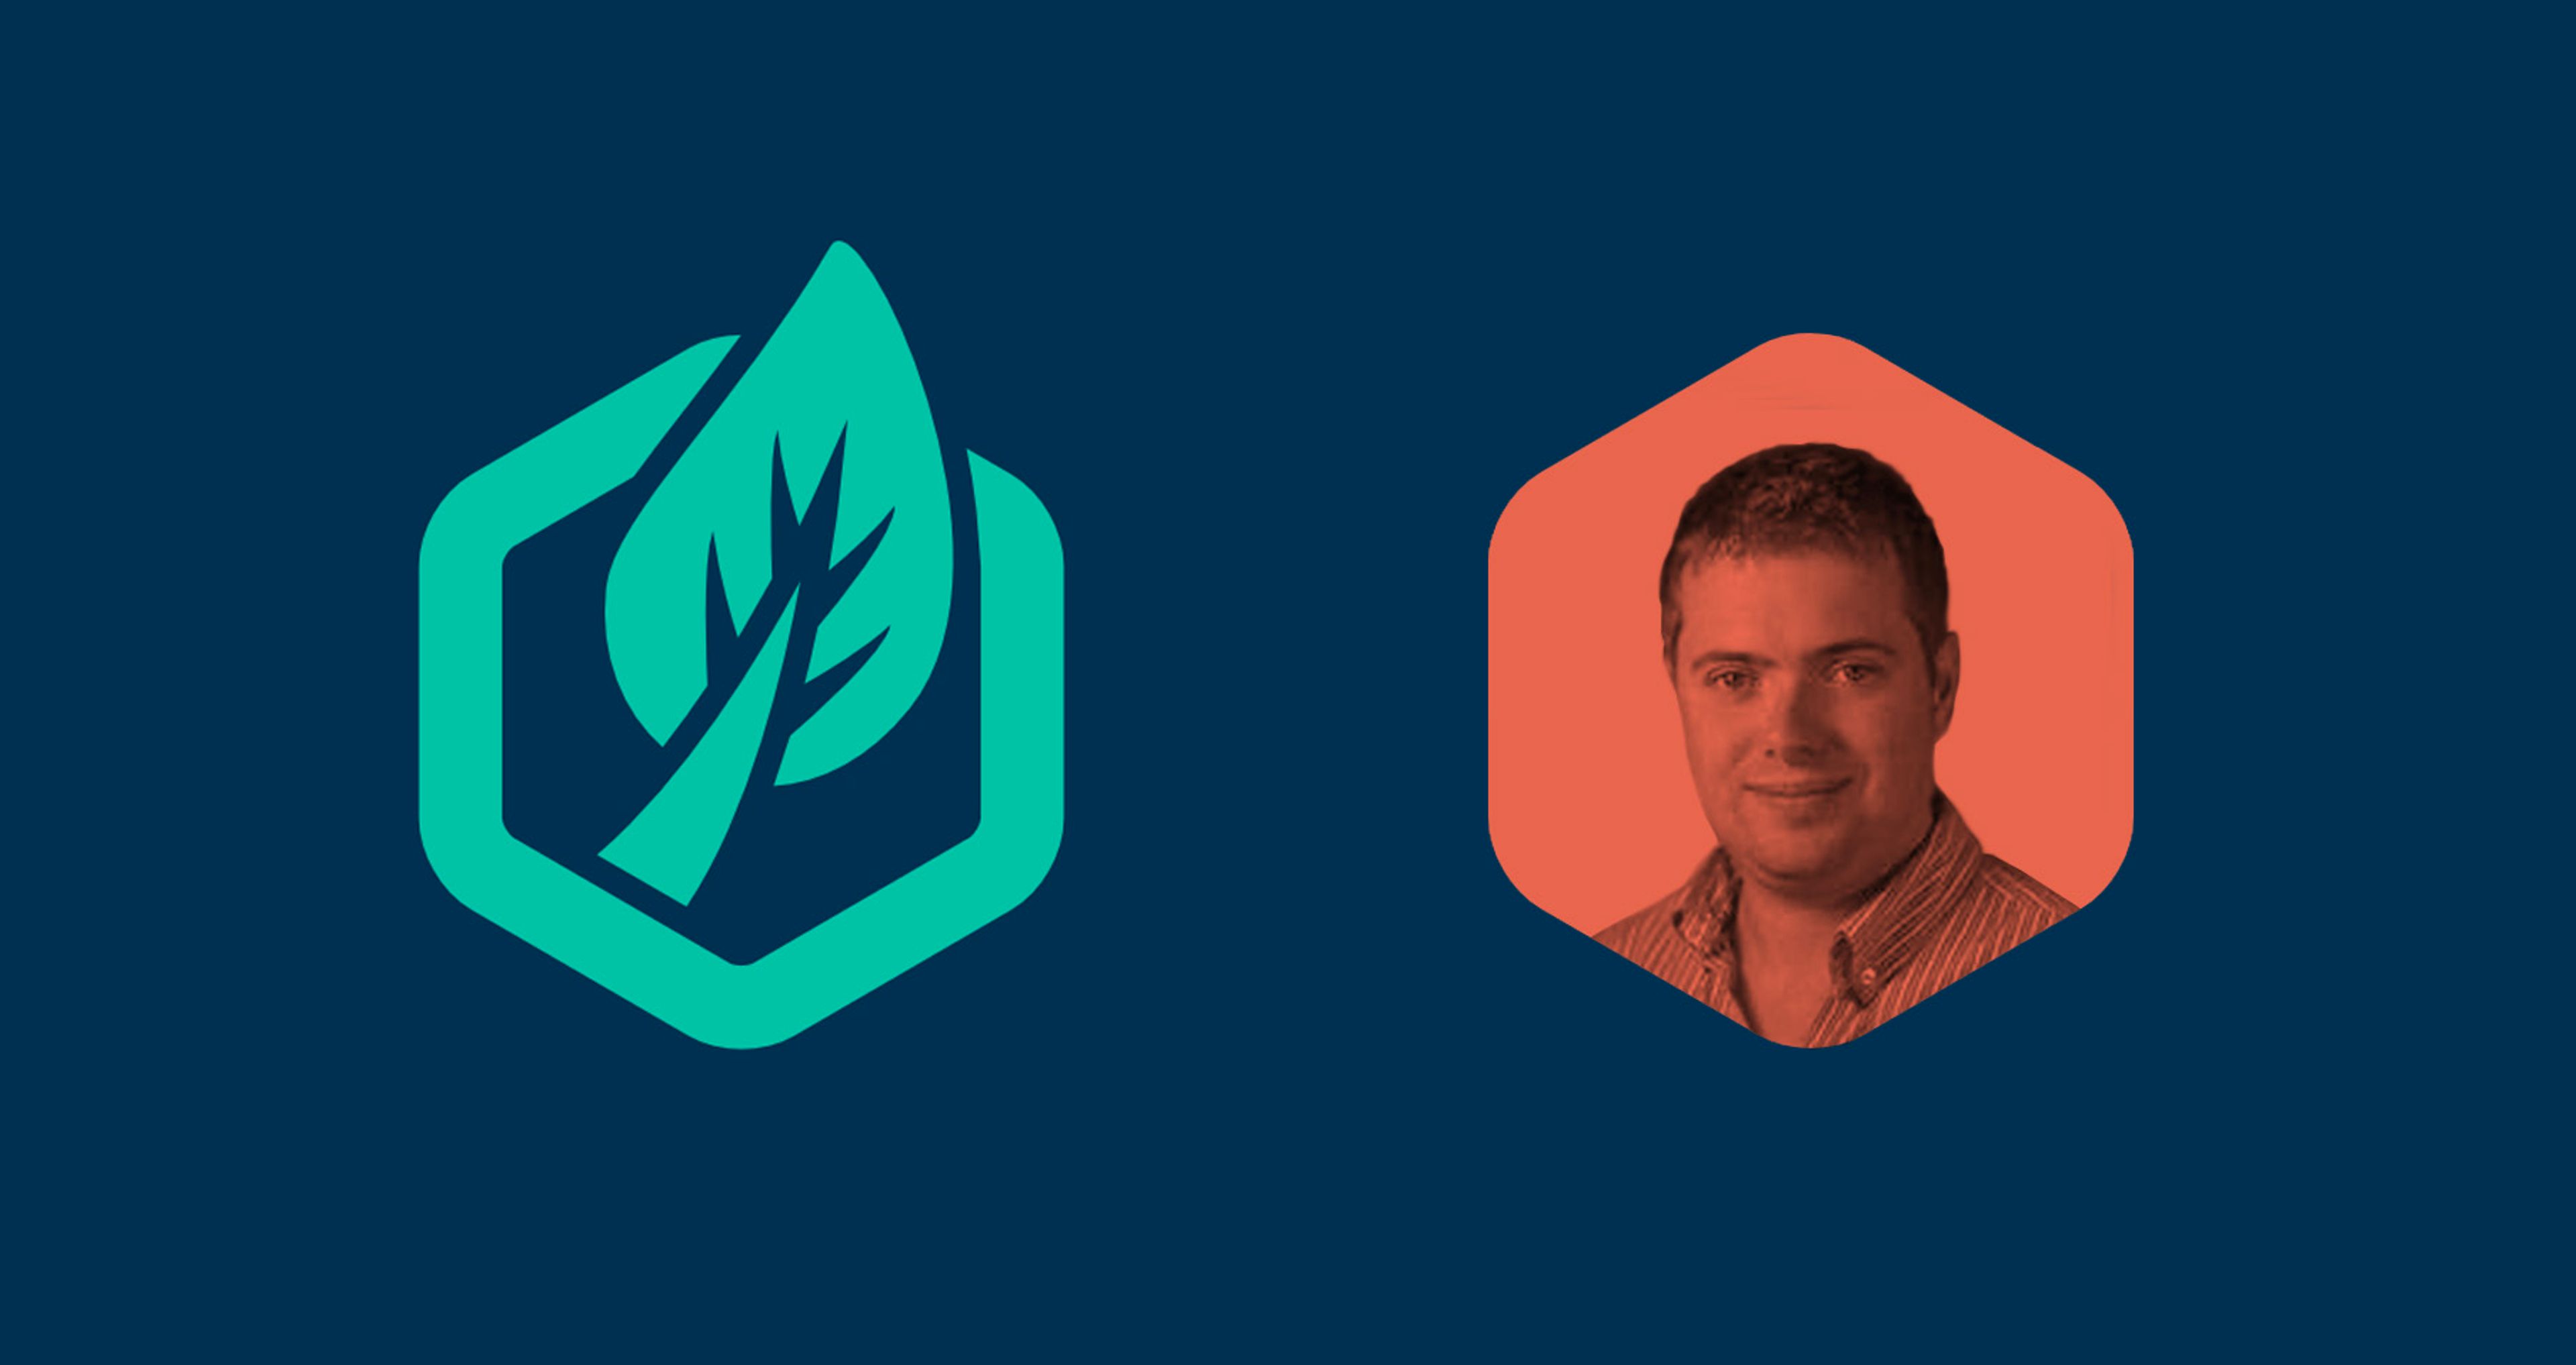 Image of the Contensis logo icon - a hexagon with a leaf in the center in aqua - next to an orange hexagon with the headshot of Richard Chivers in a monochromatic tone.